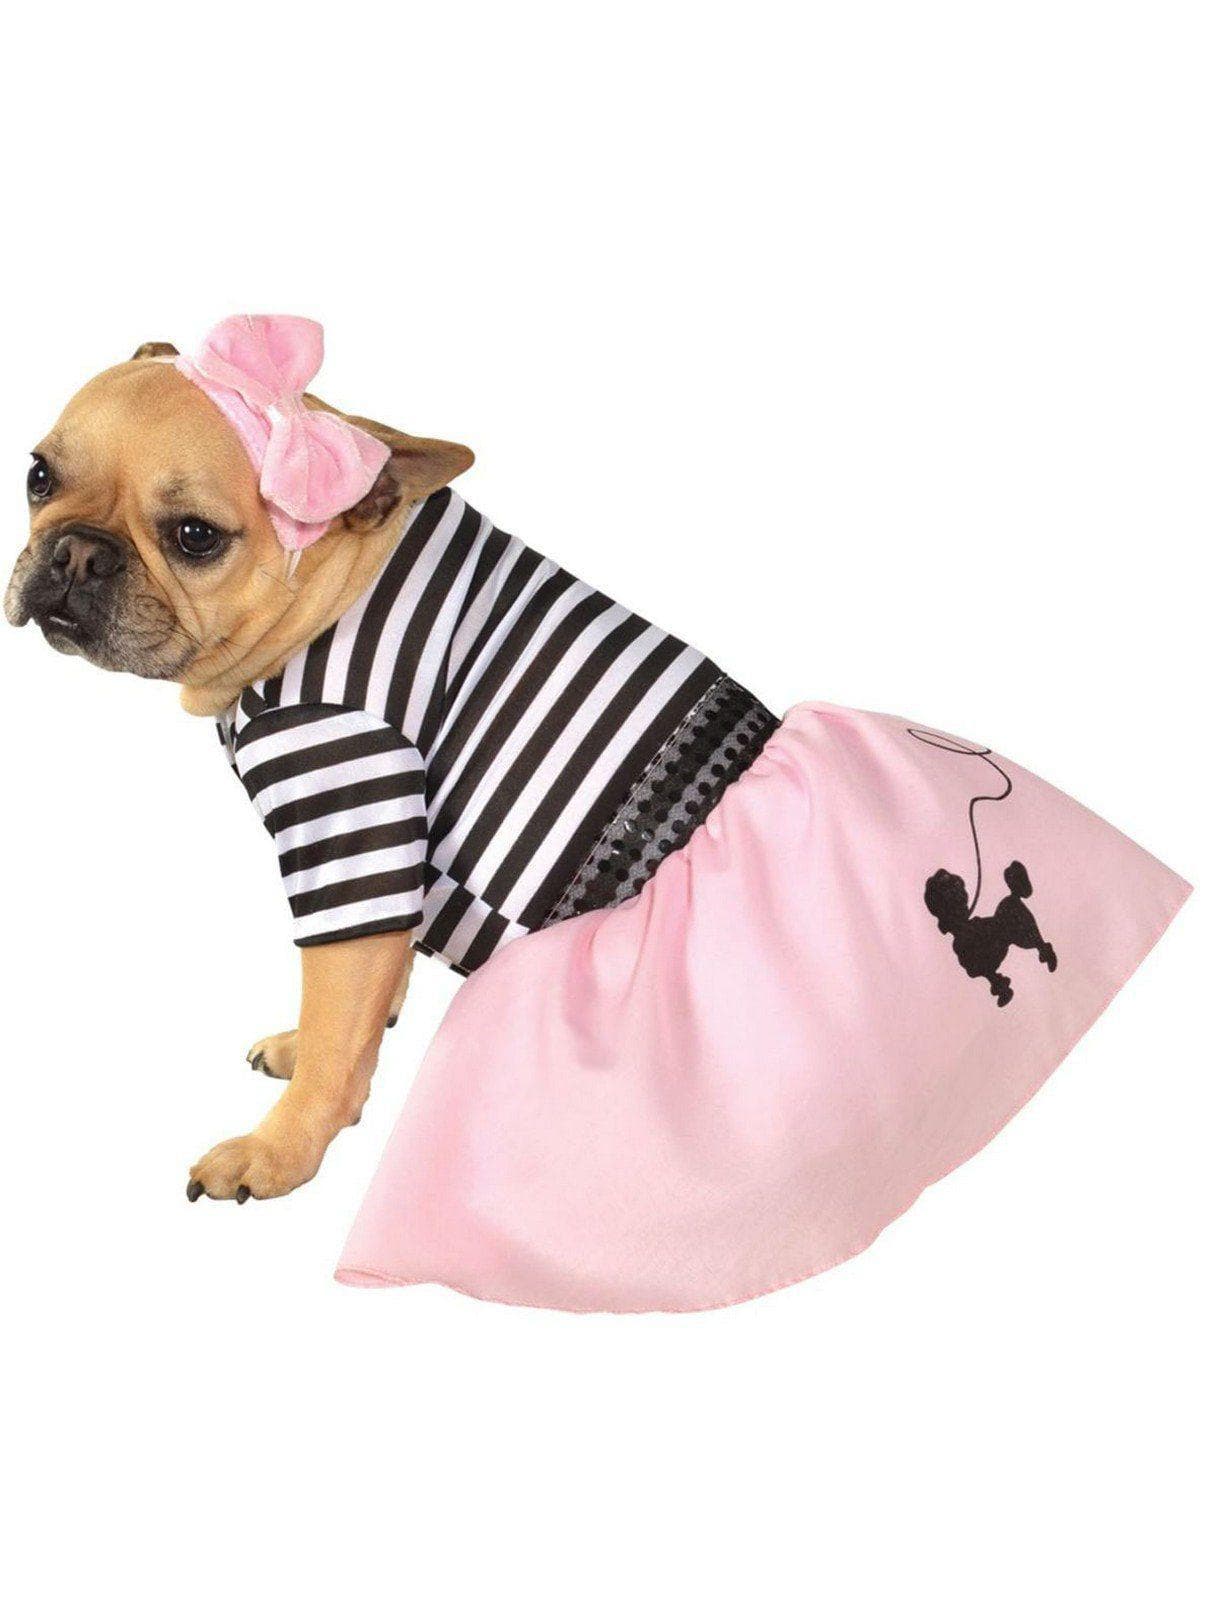 1950's Pink Poodle Skirt Pet Costume - costumes.com